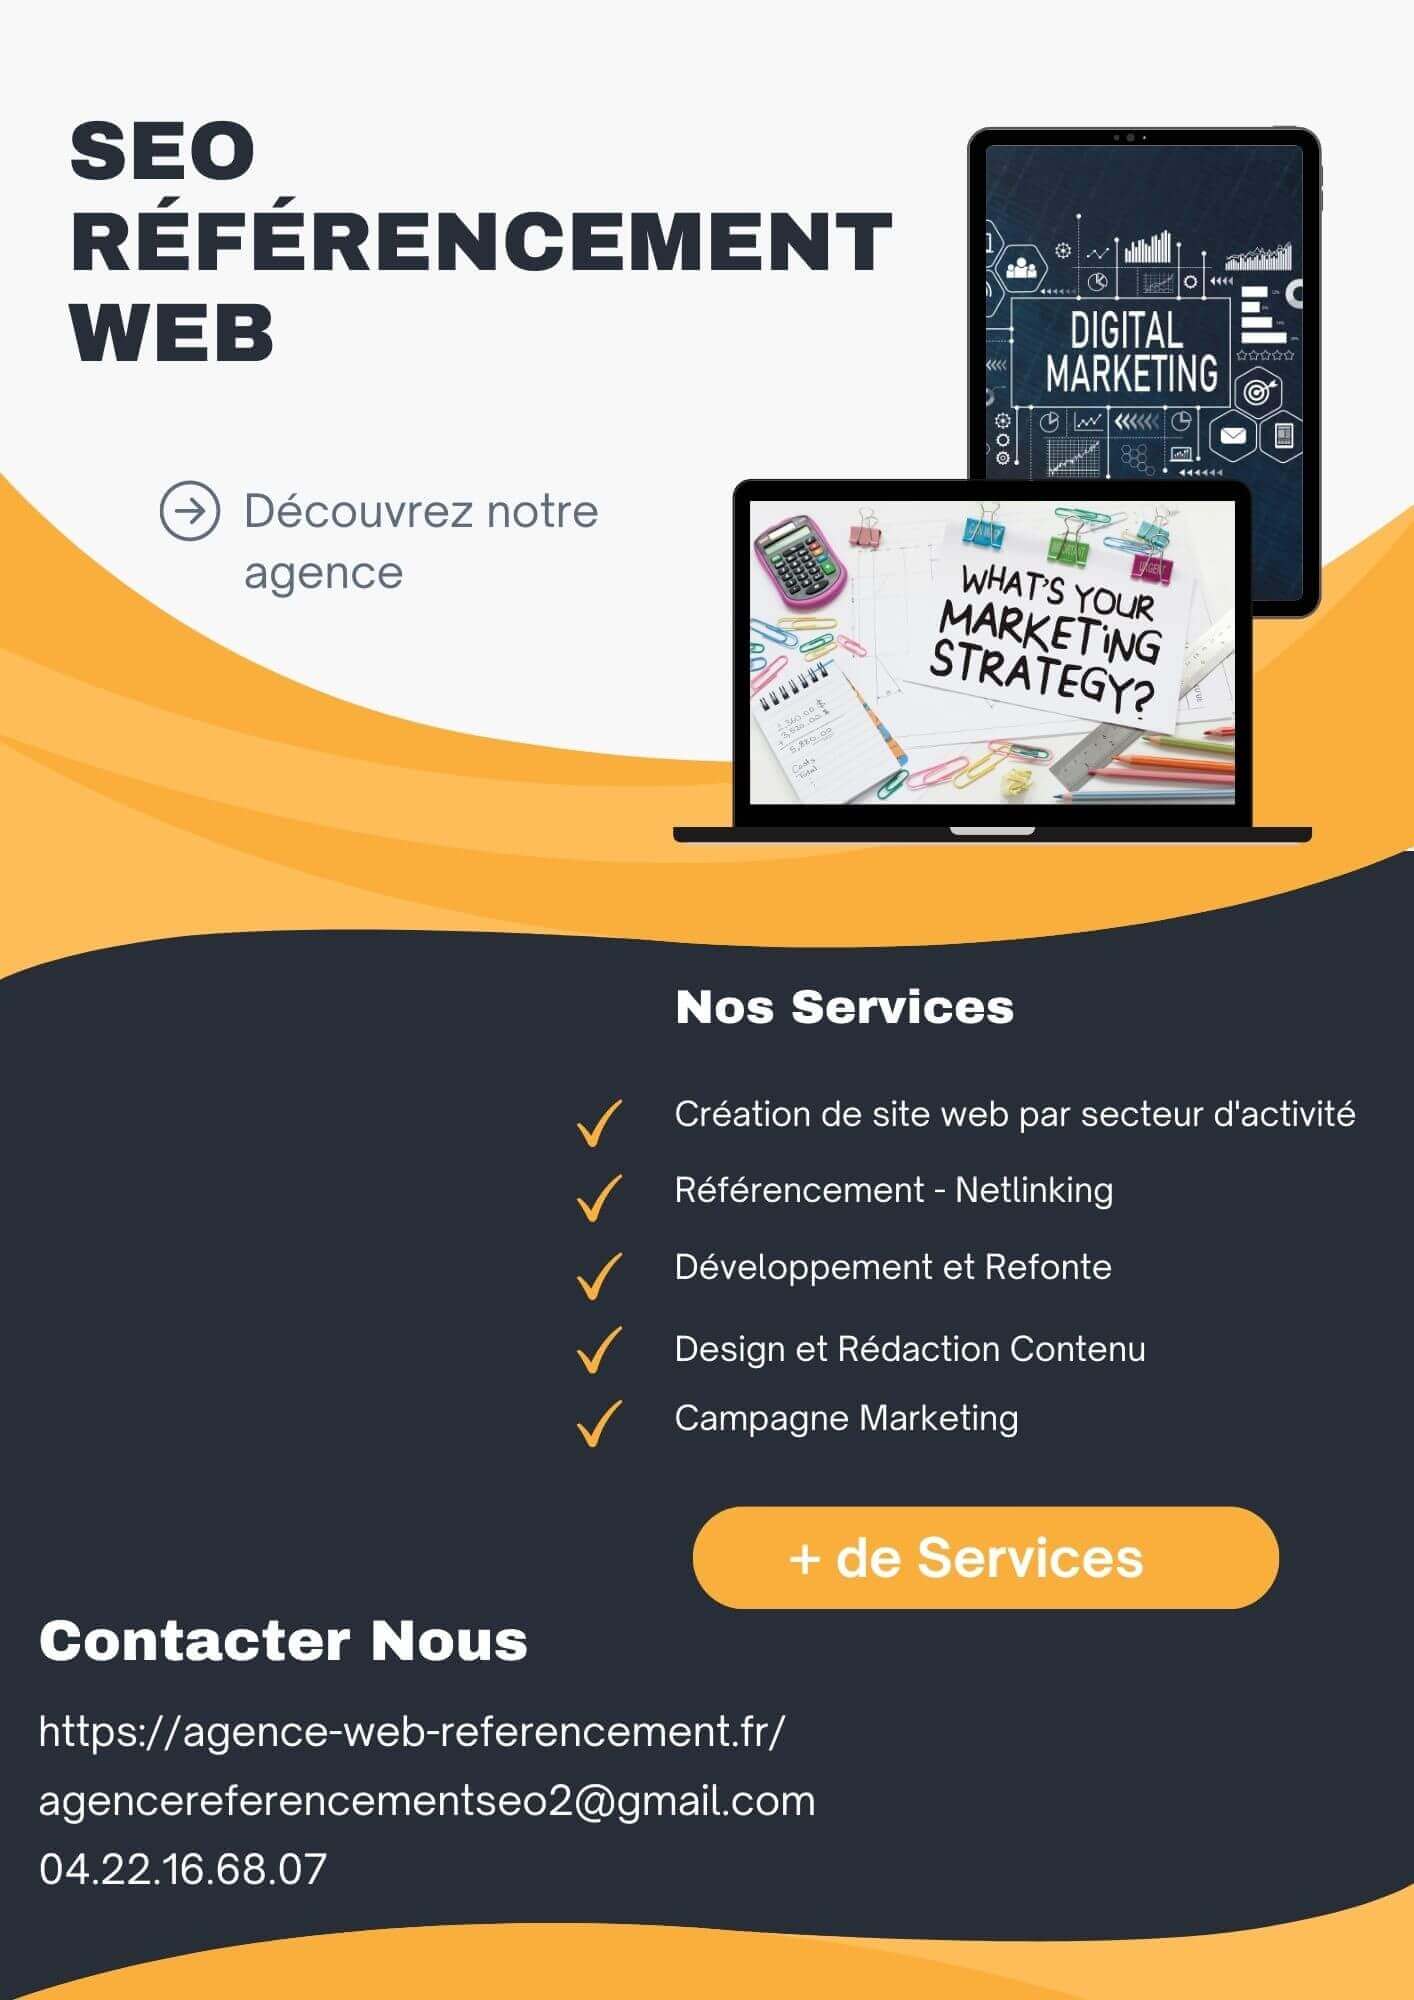 https://Agence-web-referencement.fr/